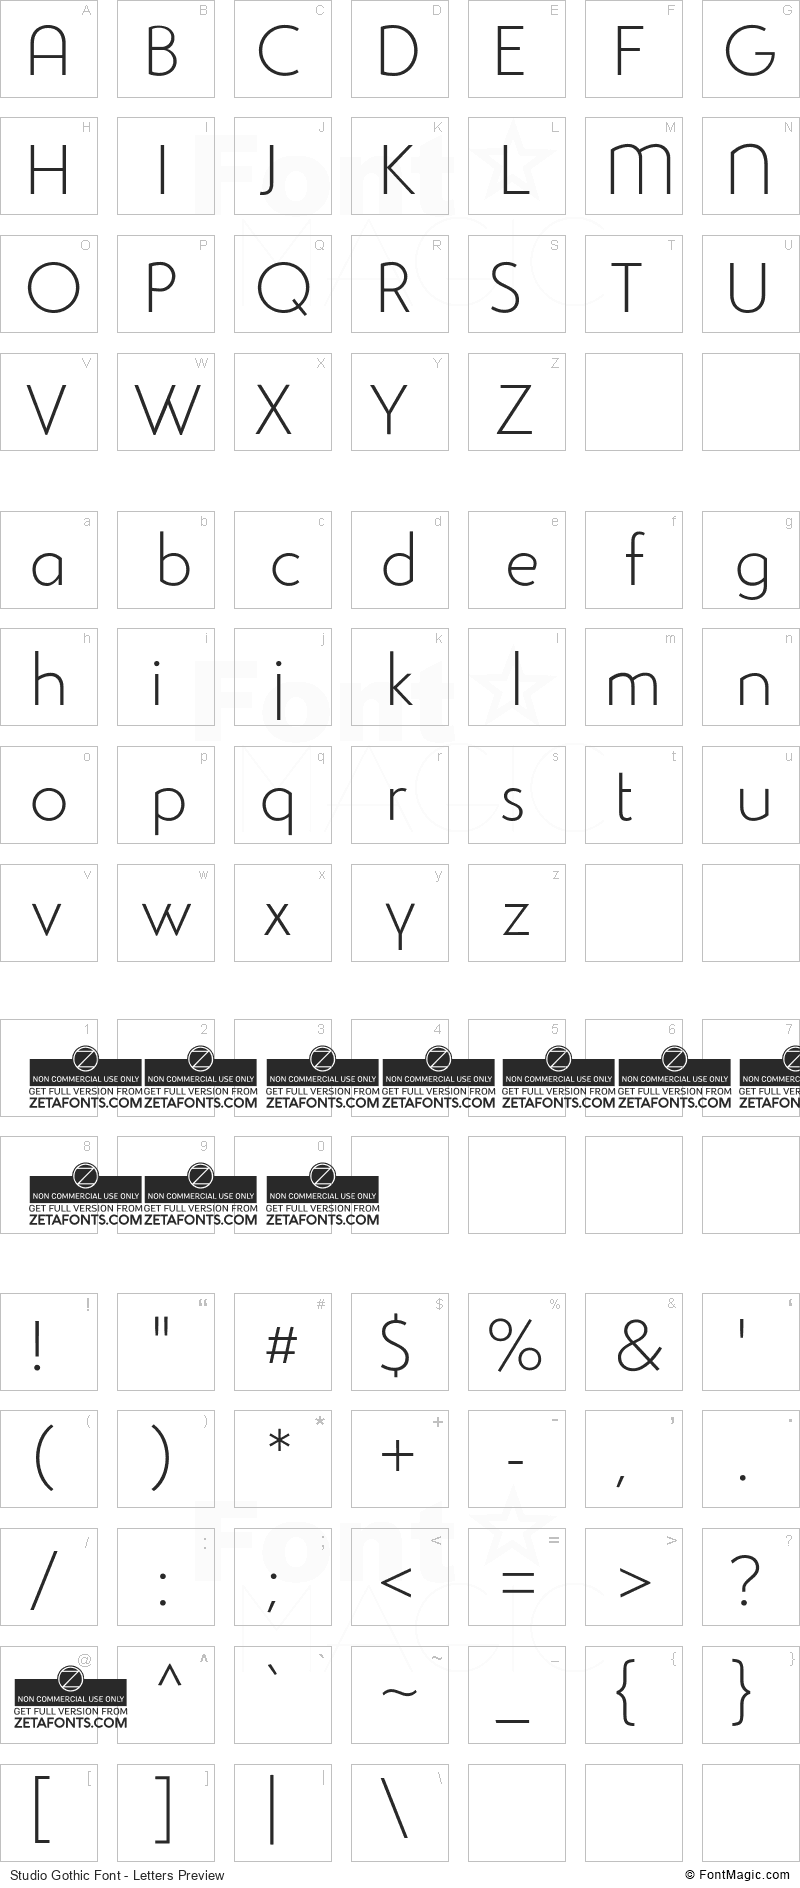 Studio Gothic Font - All Latters Preview Chart